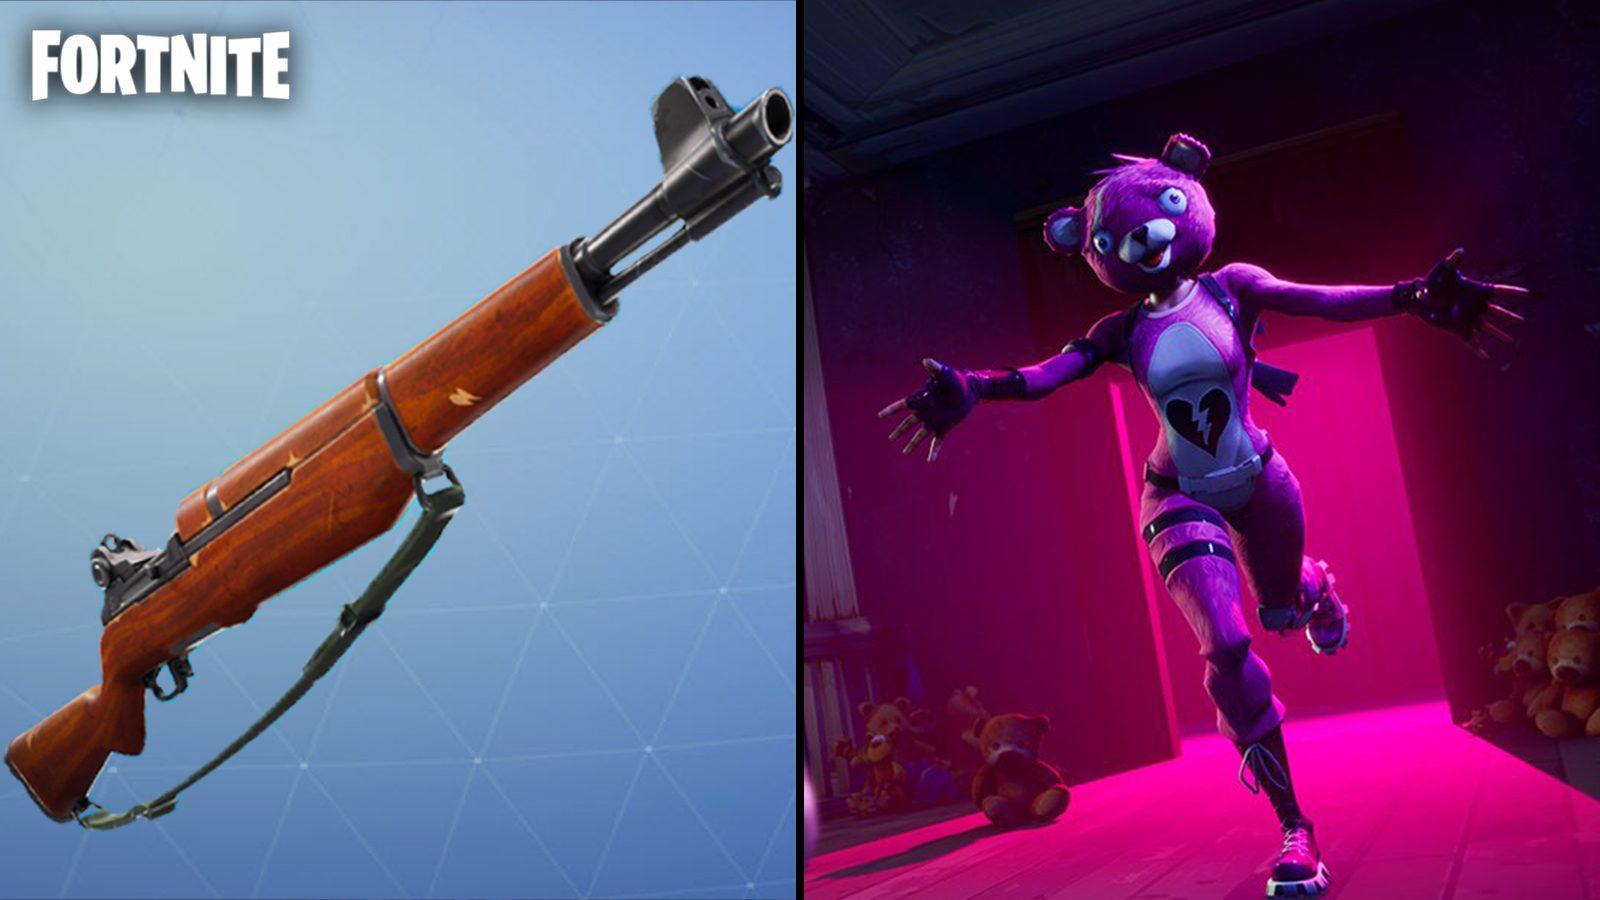 Many Free Fortnite Rewards Will Be Removed Soon, Here's How You